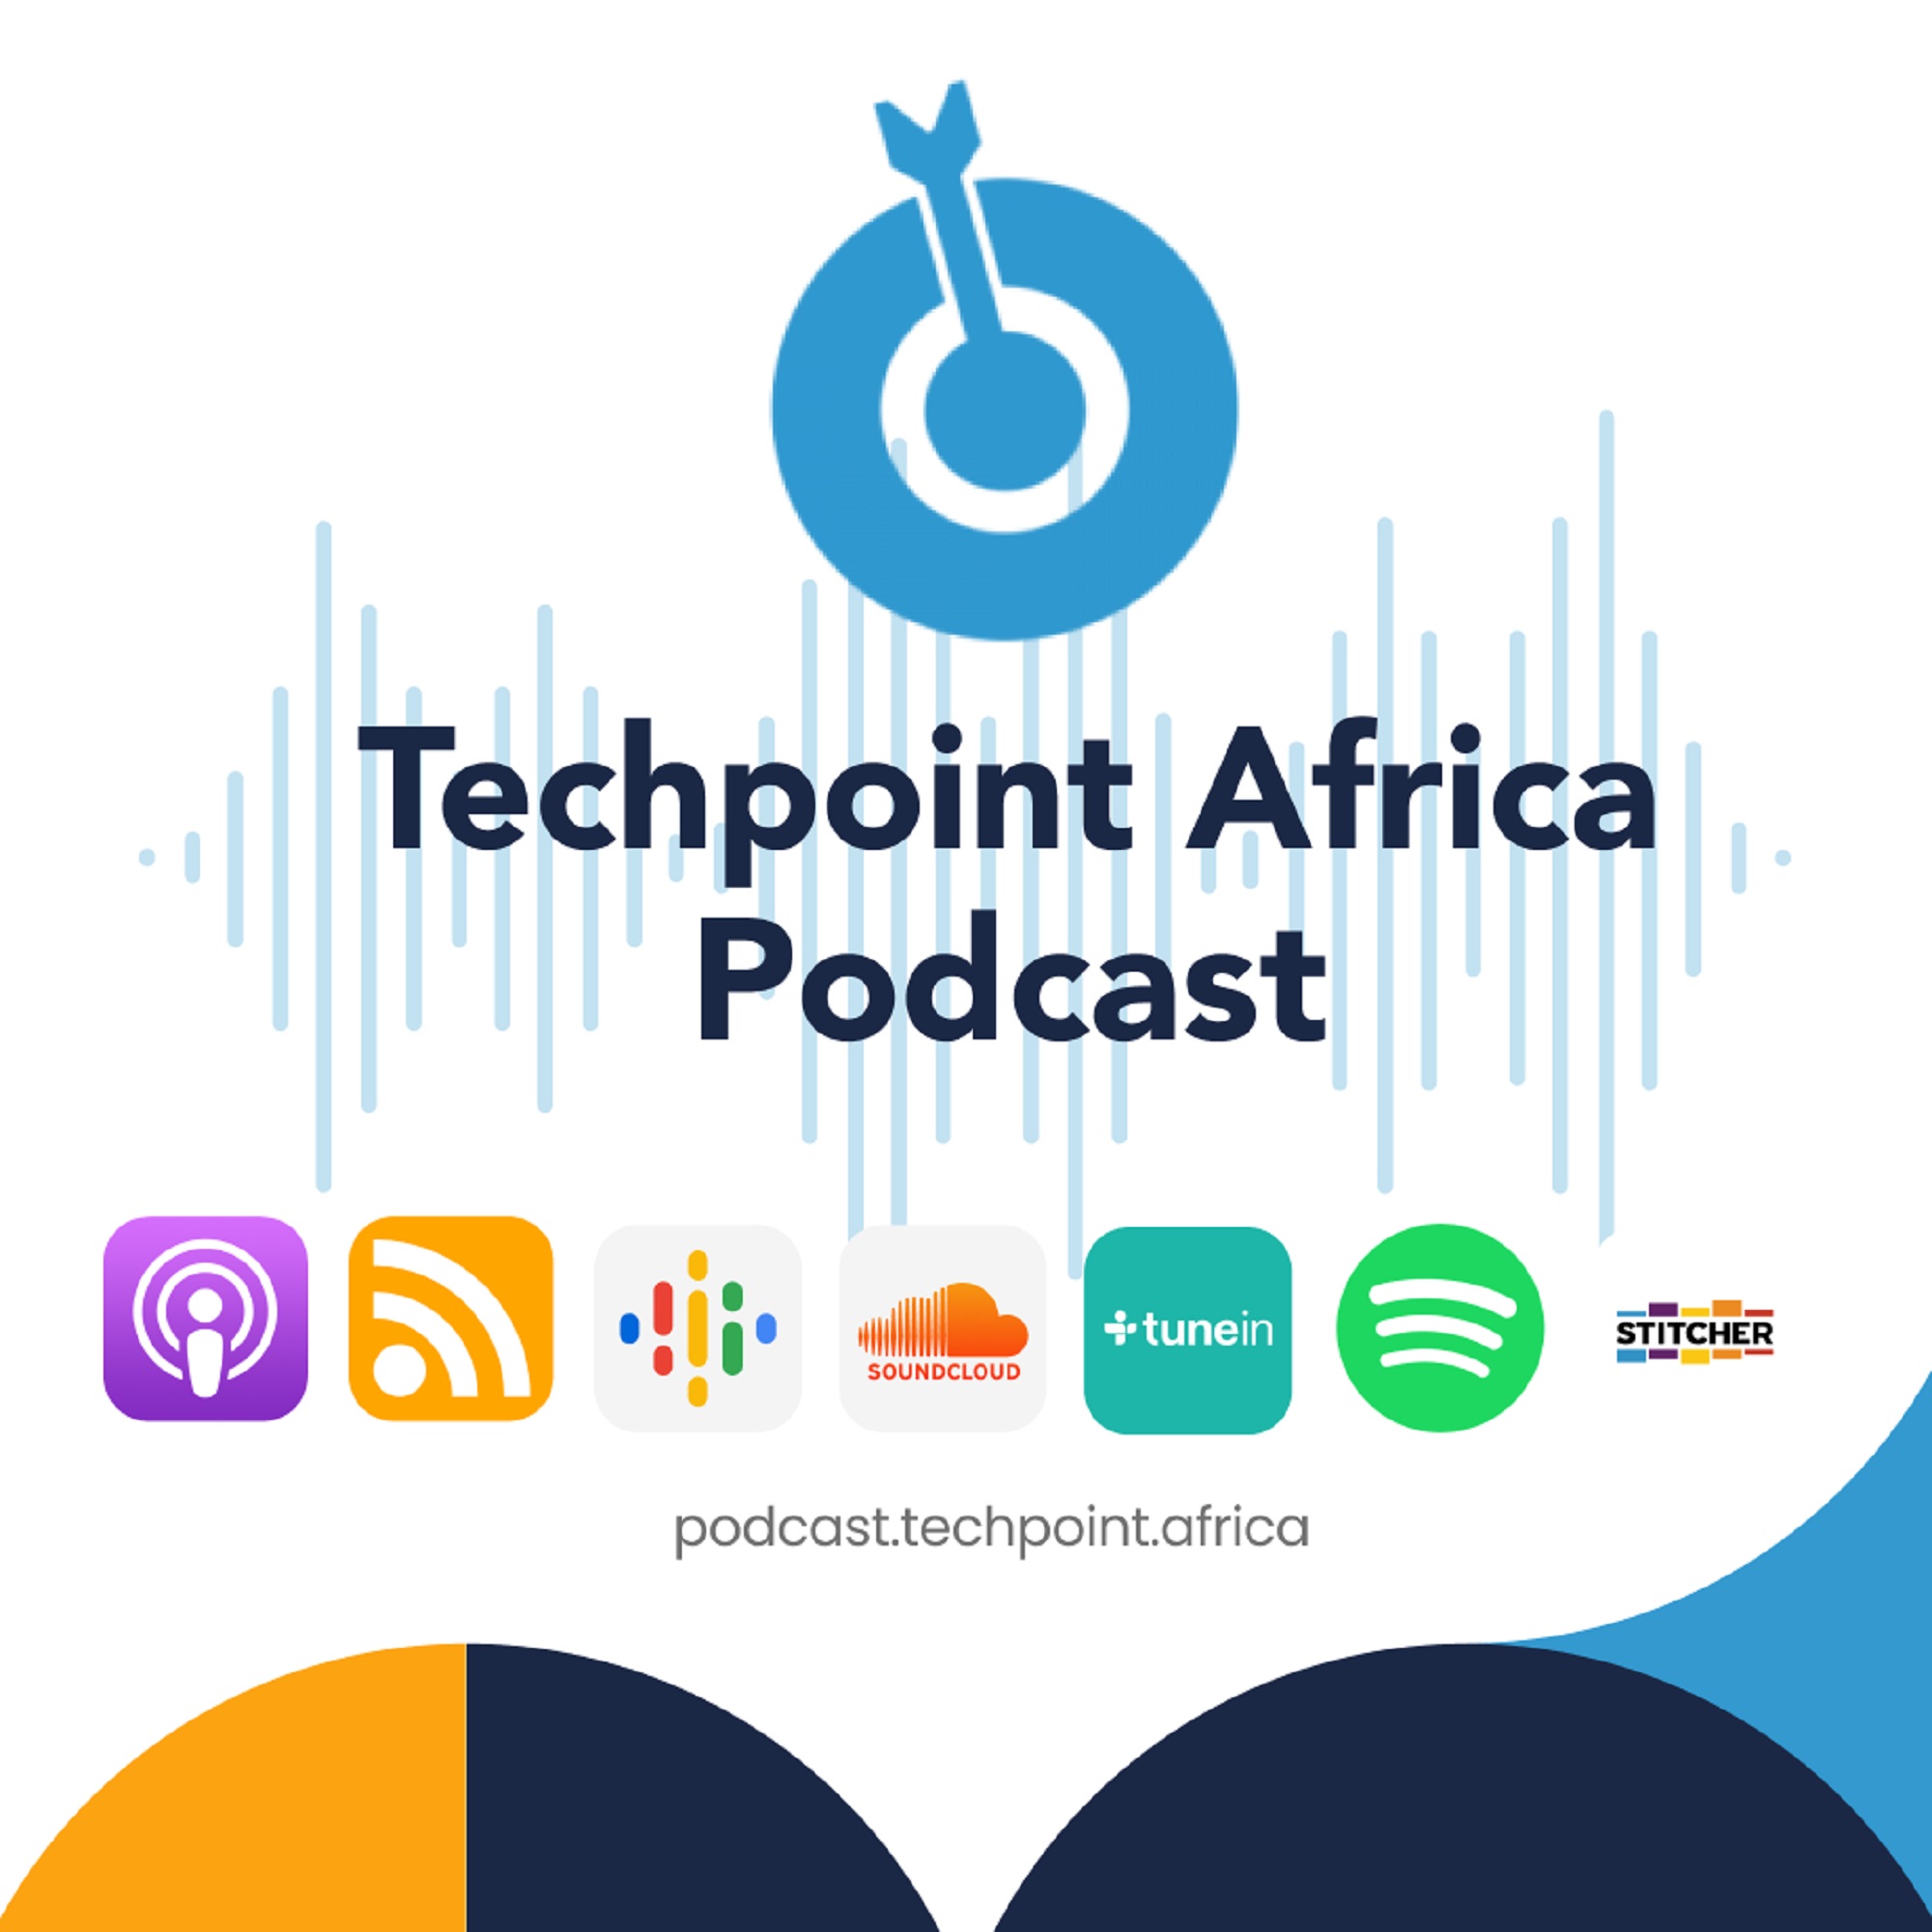 Join 'Community' by Techpoint Africa, Chipper Cash raises $13.8m, Orange telecom eyes Nigeria & SA